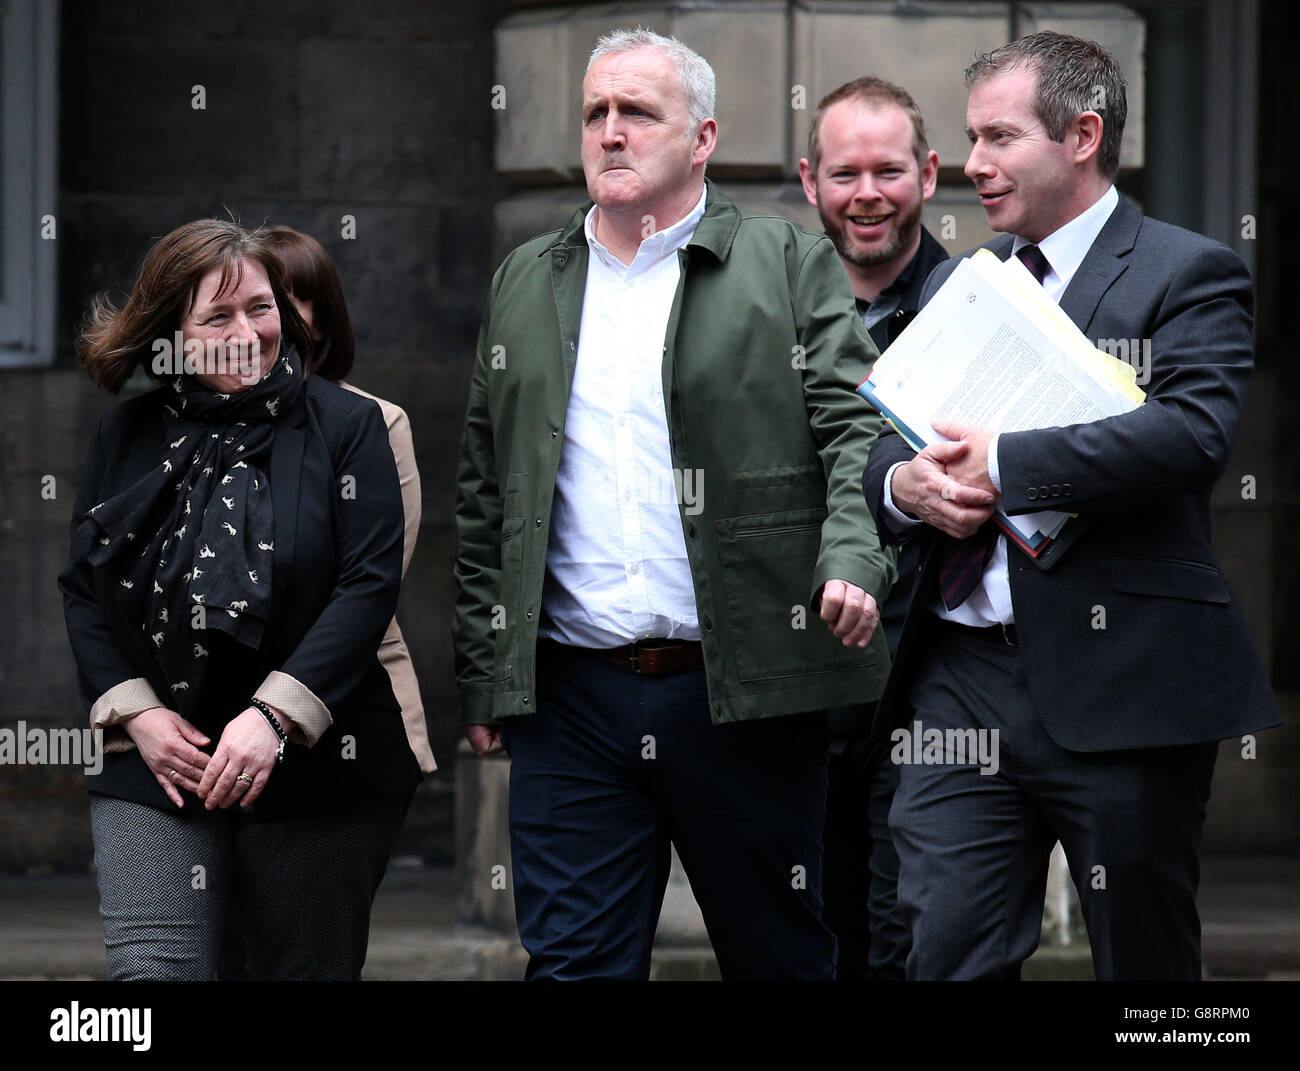 Jacqueline and Matthew McQuade (front left and centre) parents of Erin 18, who died along with her grandparents Jack Sweeney, 68, and his 69-year-old wife Lorraine in the Glasgow bin lorry crash leave the Parliament House in Edinburgh after a procedural hearing on bids for private prosecution of the driver Harry Clarke. Stock Photo